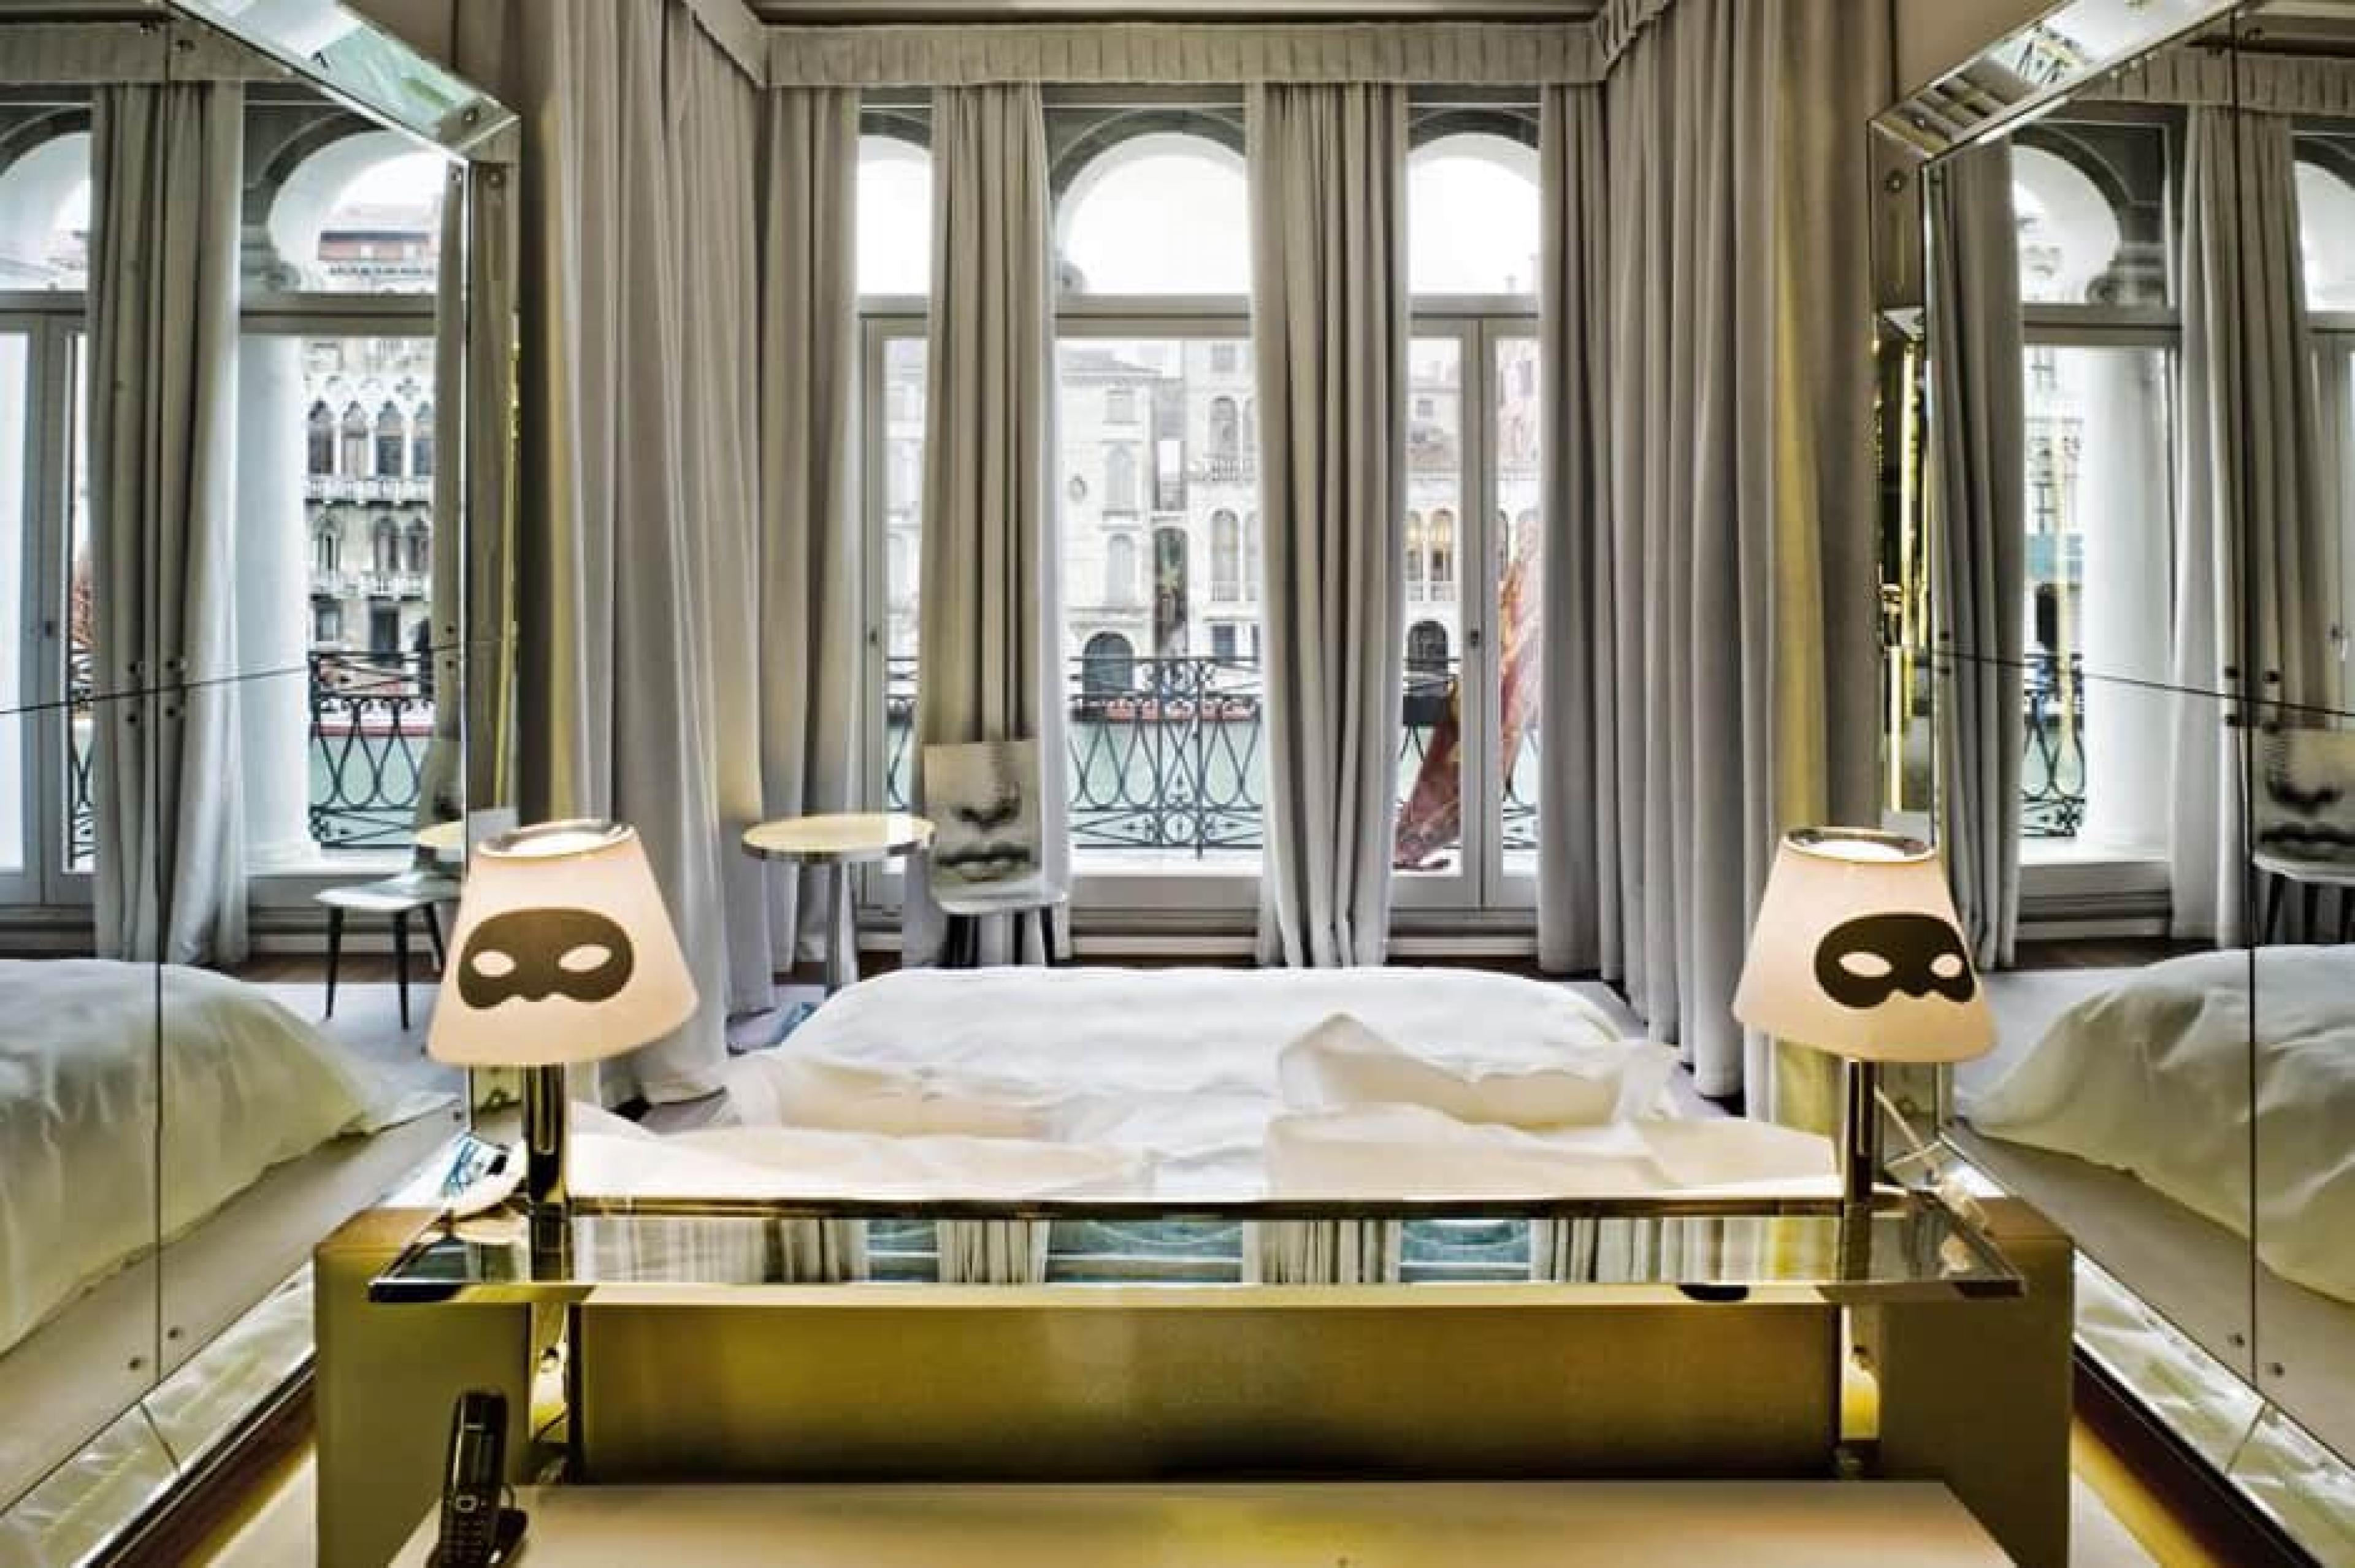 Suite at Palazzina G, Venice, Italy